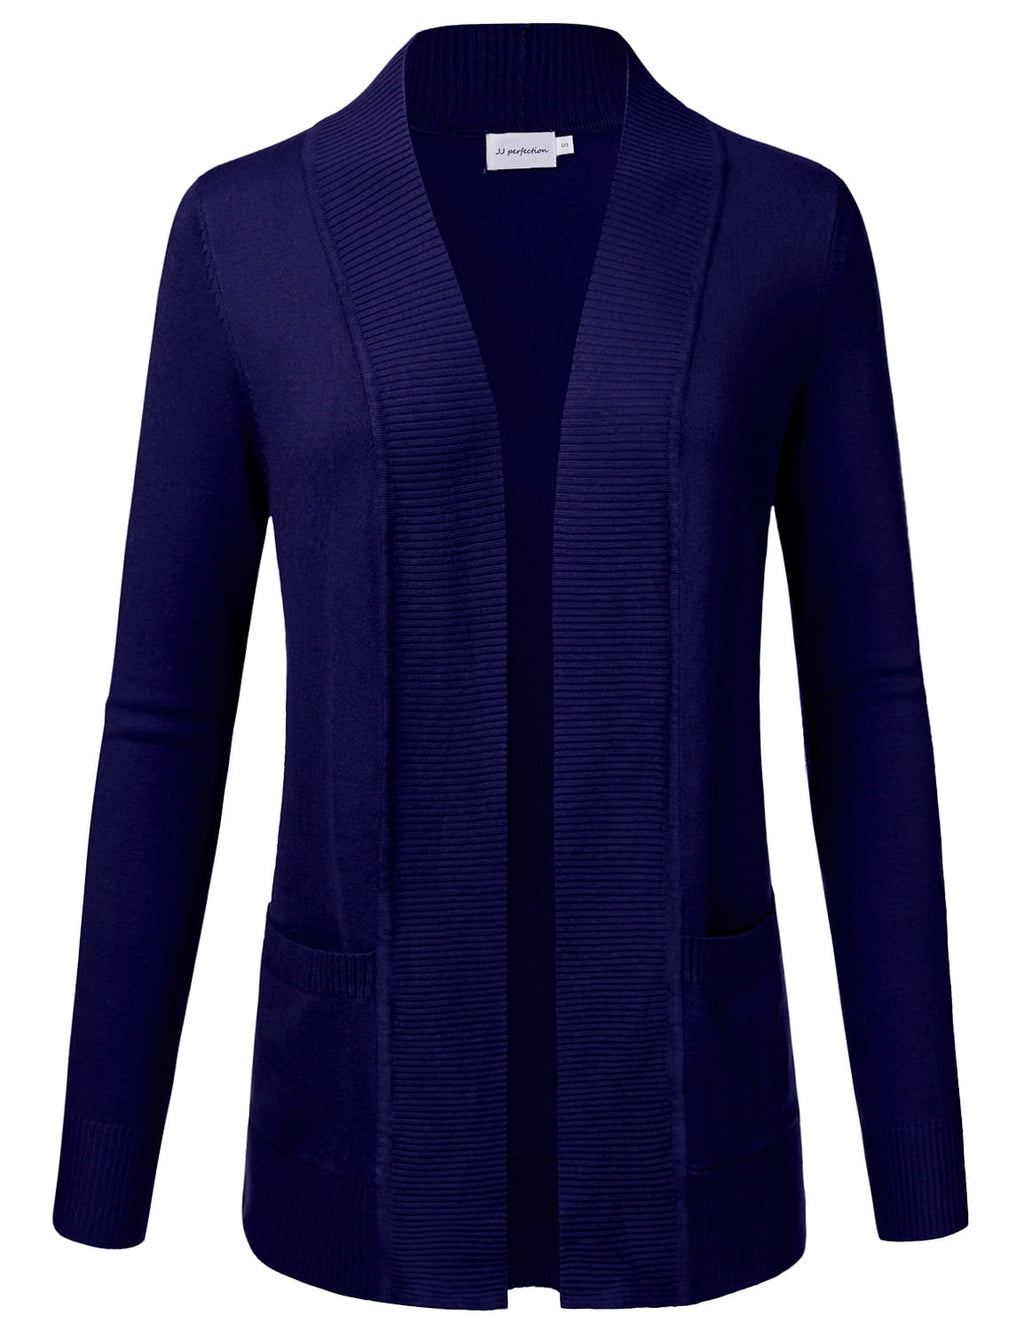 JJ Perfection Women's Solid Knit Open Front Cardigan With Pockets (Plus Size Available) - image 1 of 4